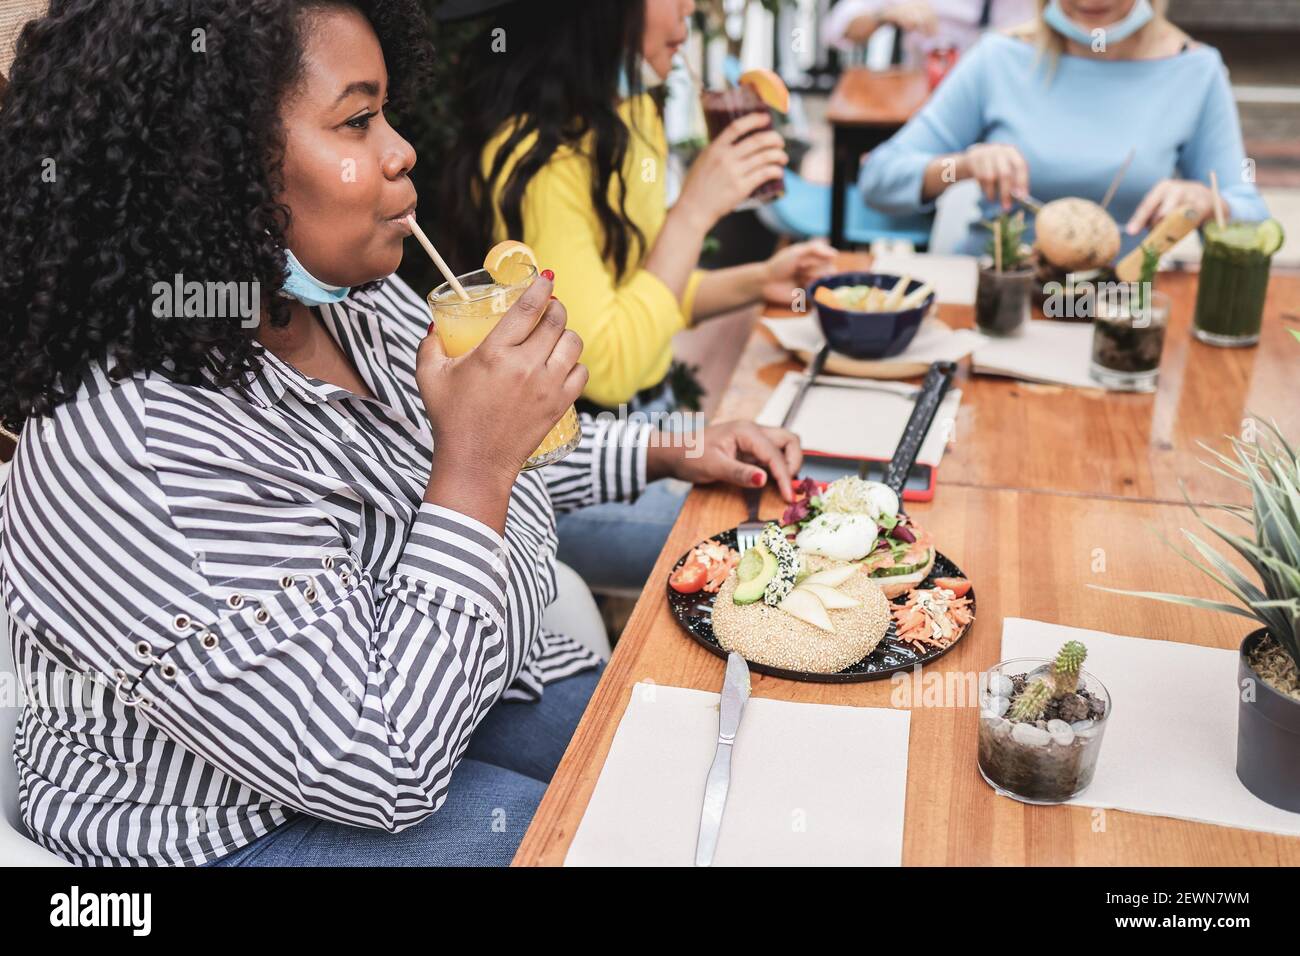 Young multiracial friends having breakfast in restaurant outdoors with masks under chins - Focus on african girl Stock Photo